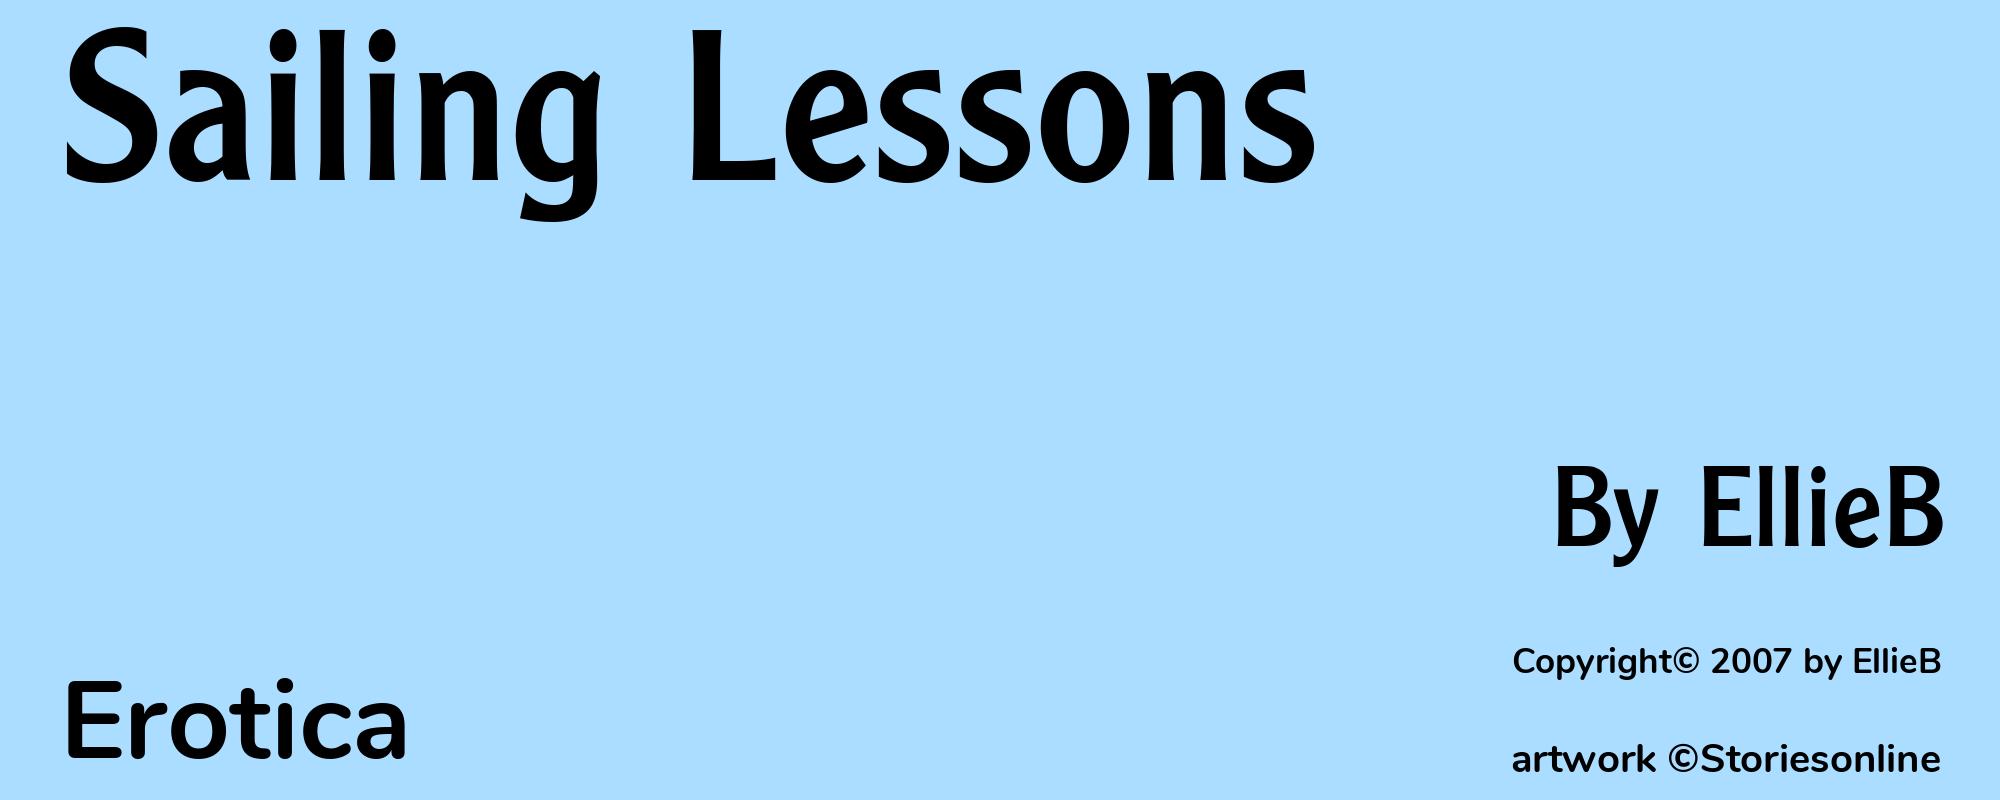 Sailing Lessons - Cover